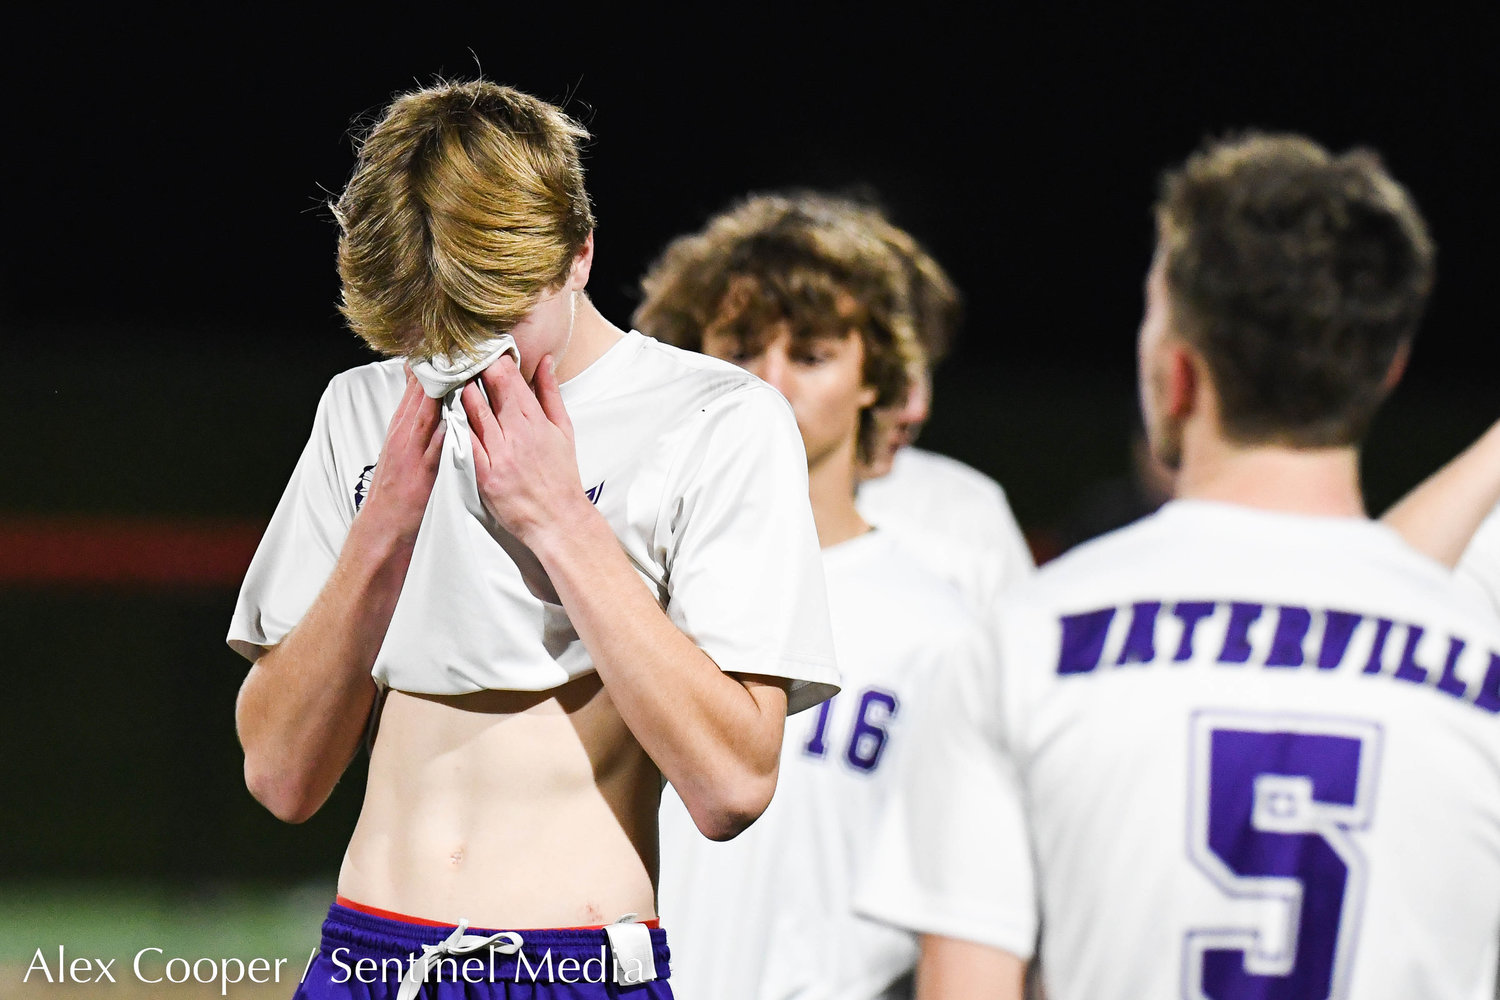 Waterville players react after losing the Section III Class C final 1-0 to Cooperstown on Tuesday, Nov. 1 at VVS High School.